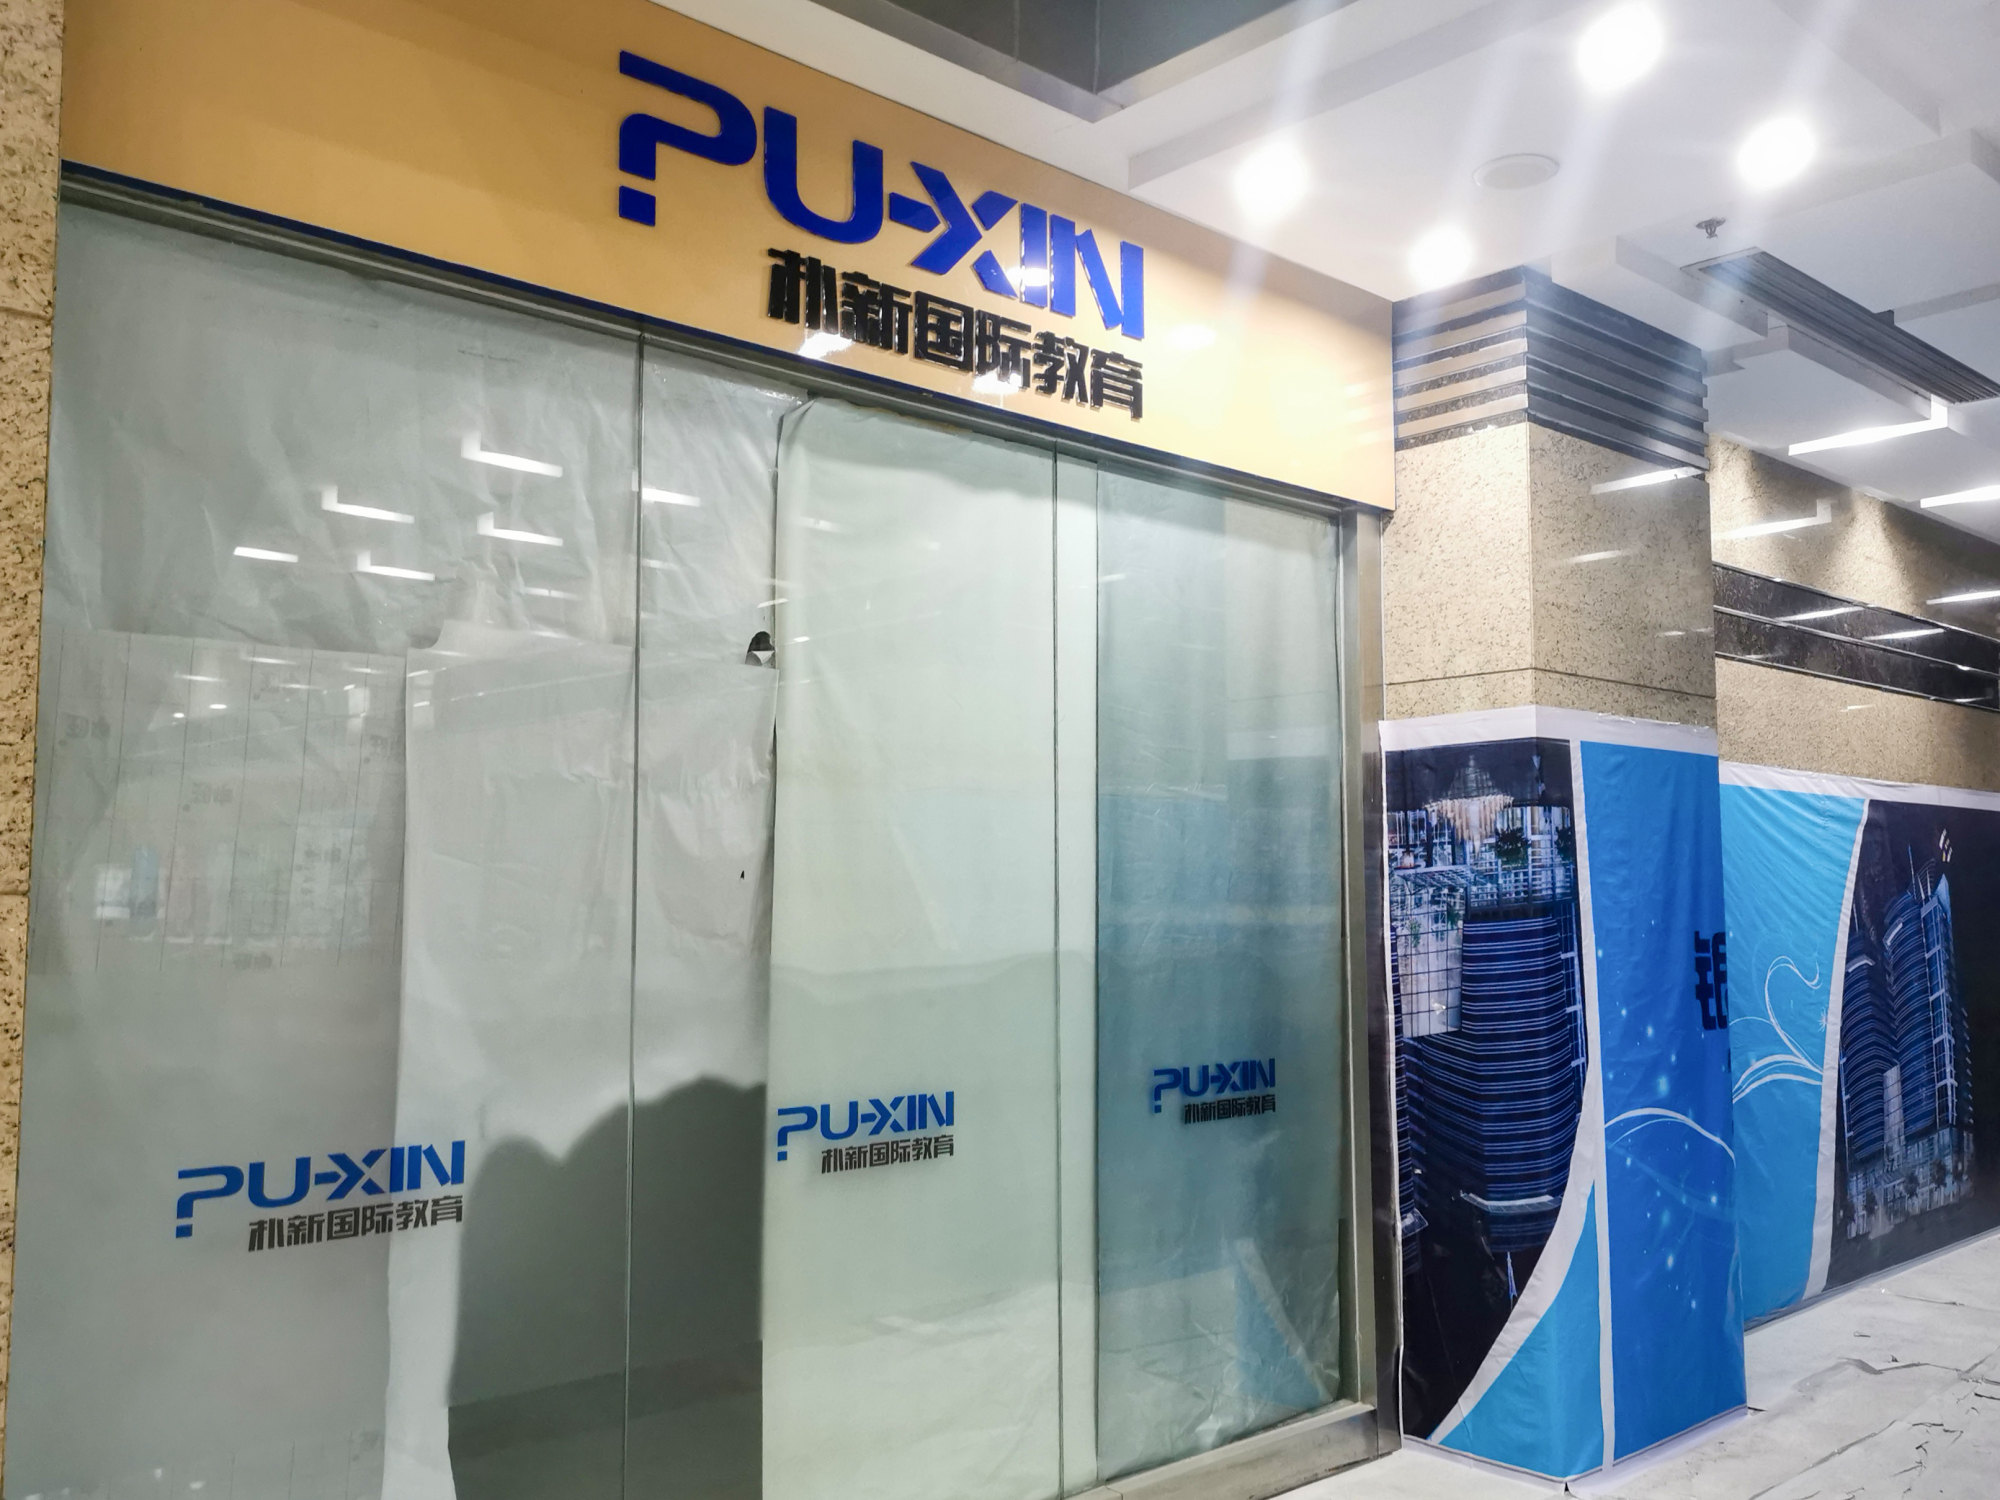 Tutoring firm Puxin Ltd, which delisted from New York Stock Exchange in May, has a closed branch at Yinwang Centre in northwestern Beijing’s Zhongguancun area. Photo: SCMP / Coco Feng